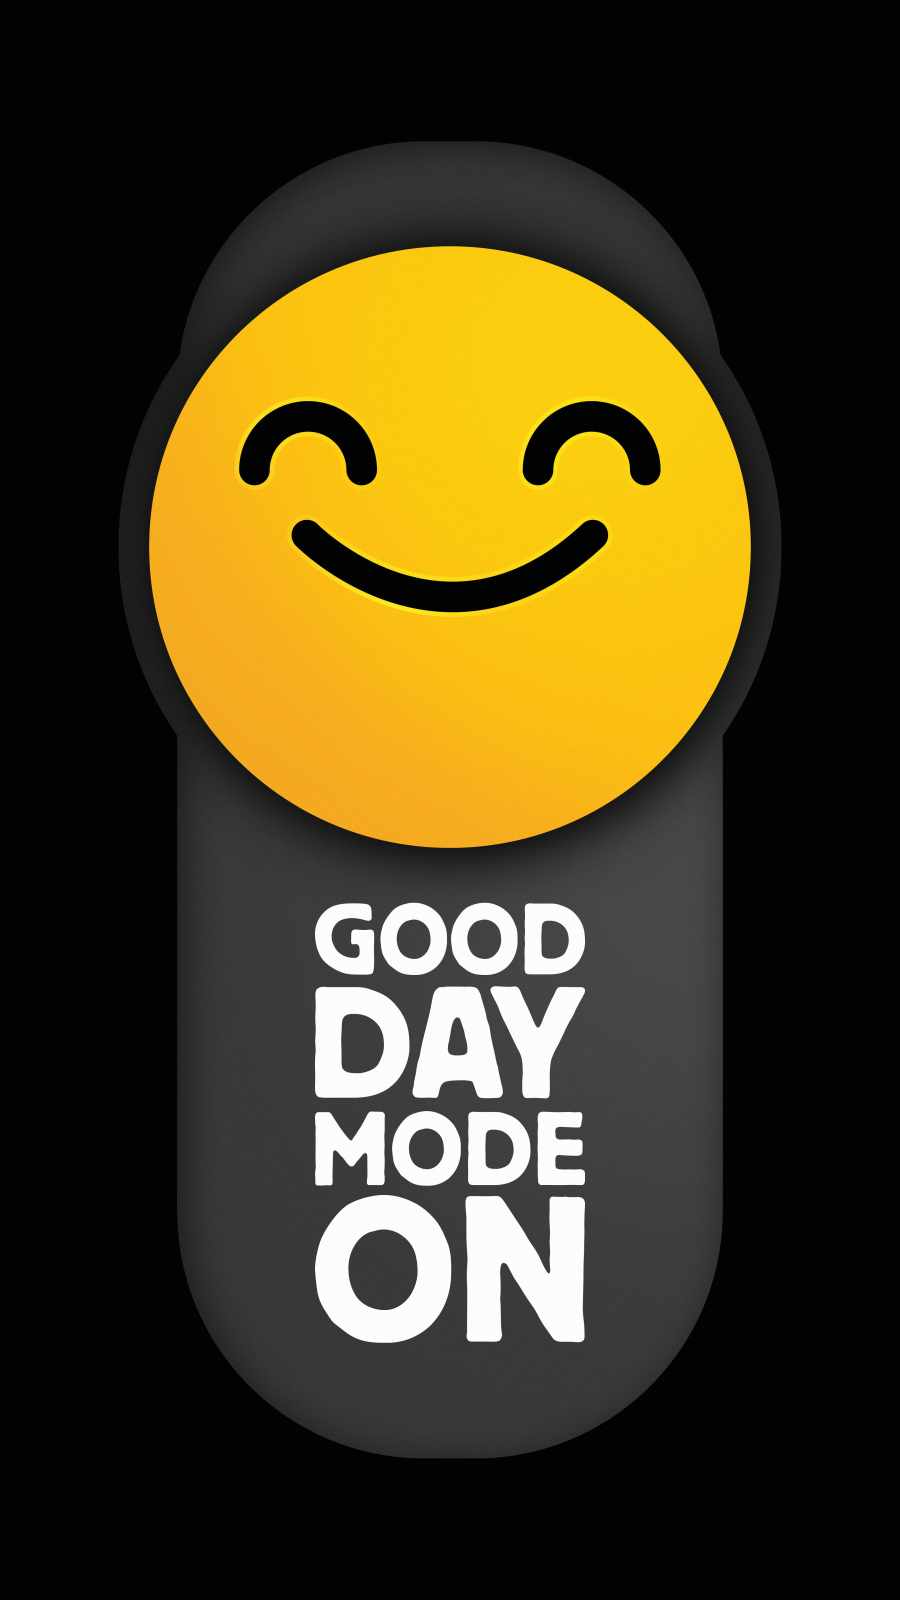 Good Day Mode ON IPhone Wallpaper  IPhone Wallpapers